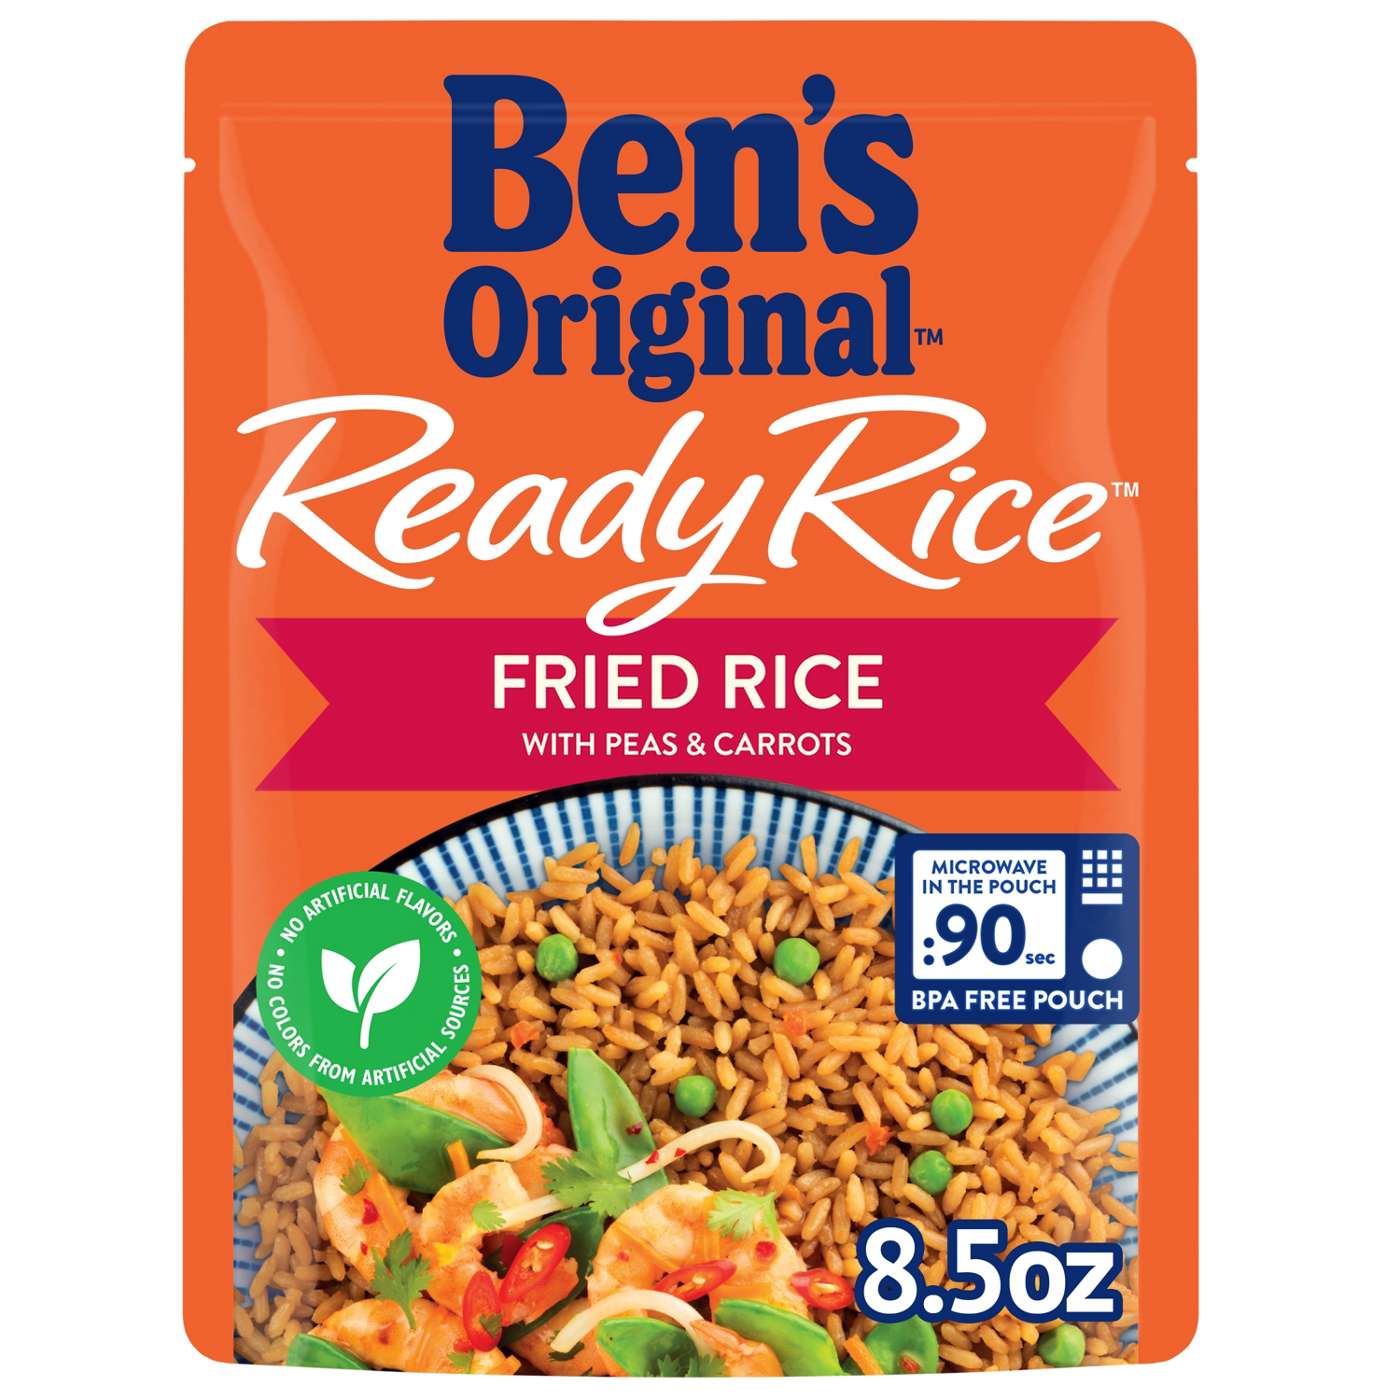 Ben's Original Ready Rice Fried Flavored Rice; image 1 of 2